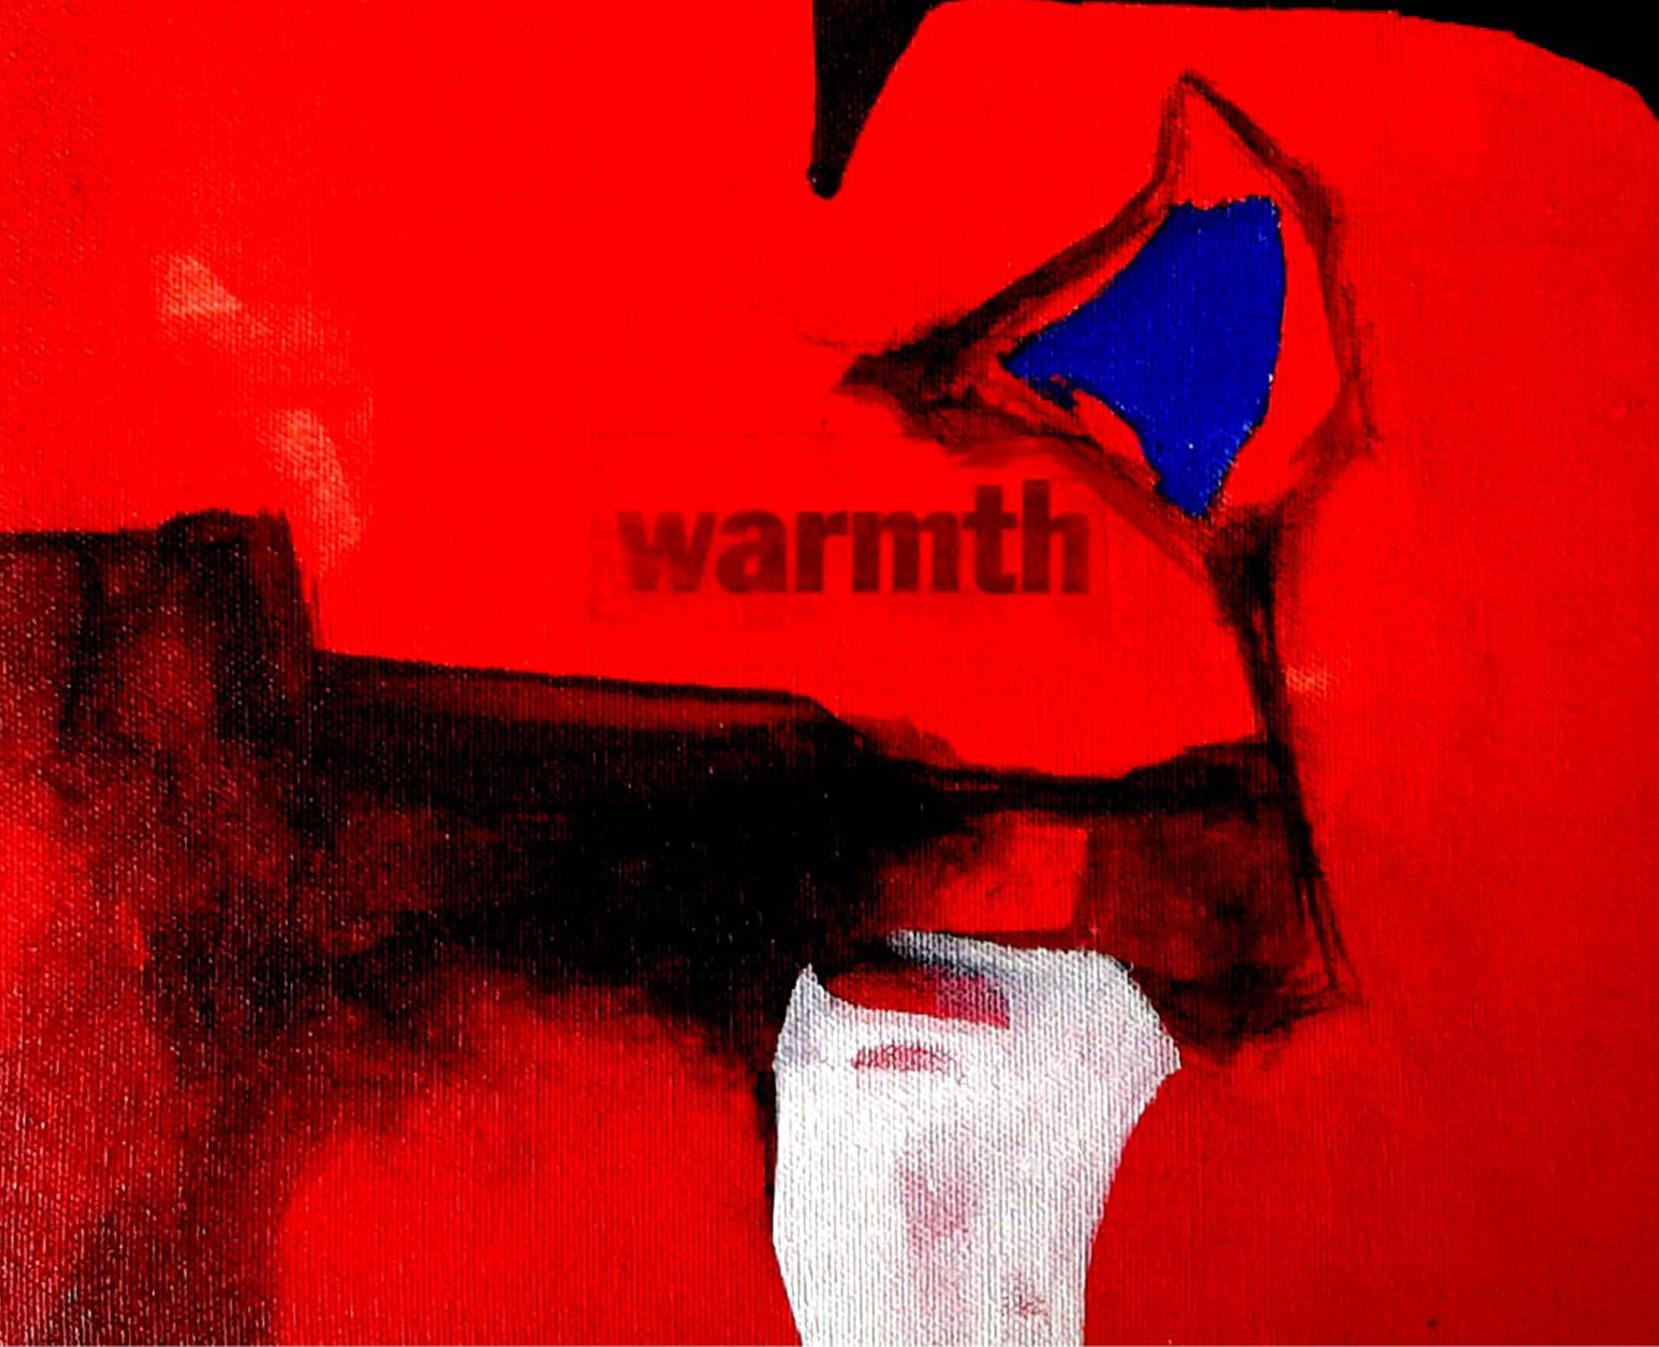 Warmth, Abstract, Arcylic Oil  on Canvas, Red, Black, Blue, White 